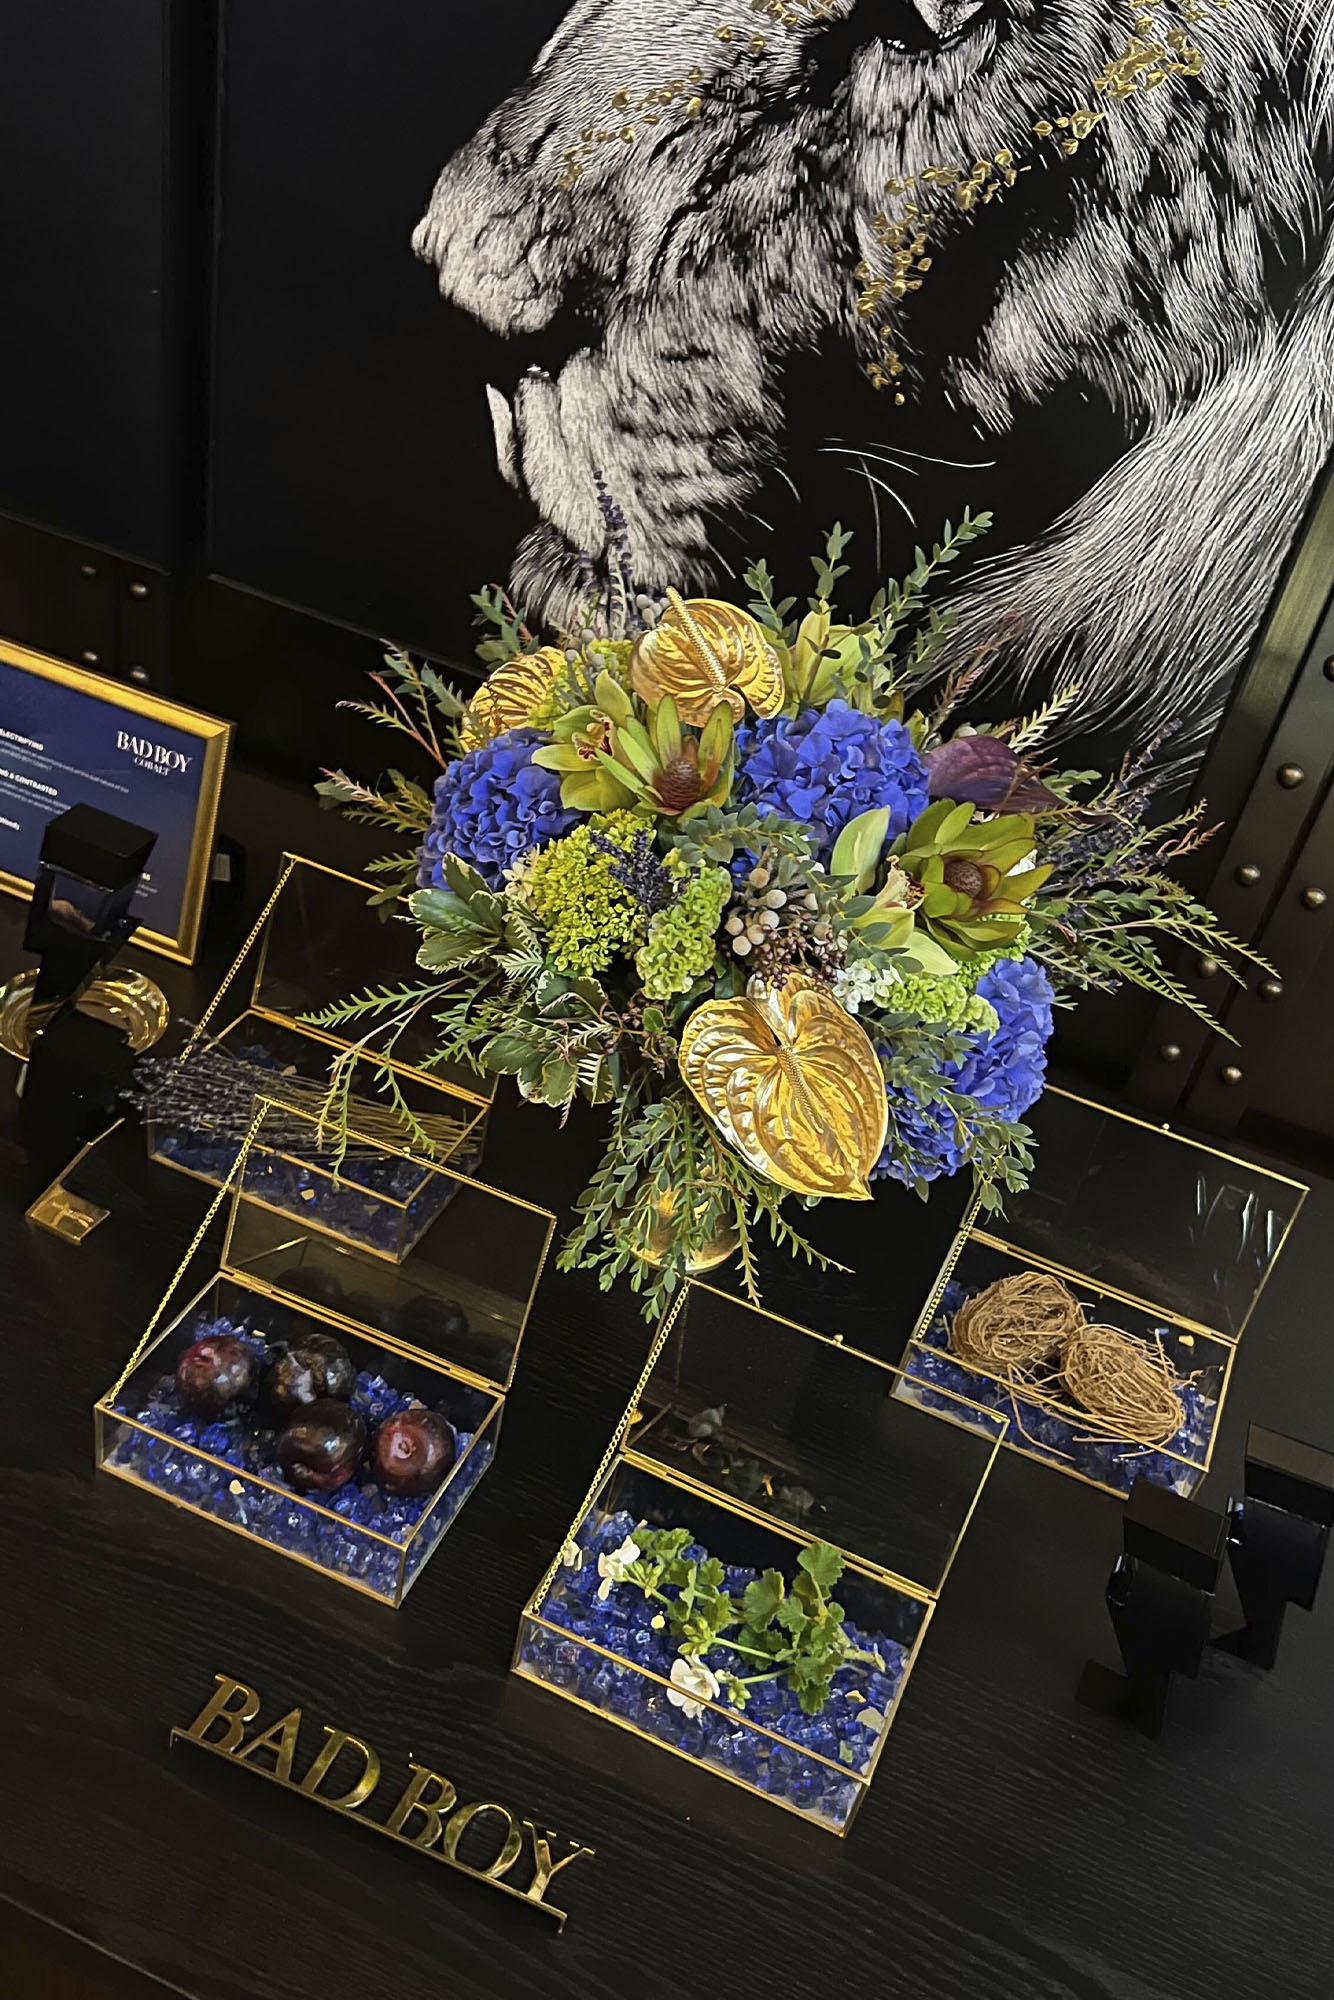 Bad Boy Cobalt launch party: table shows glass boxes with blue stones and flowers on black tablecloth